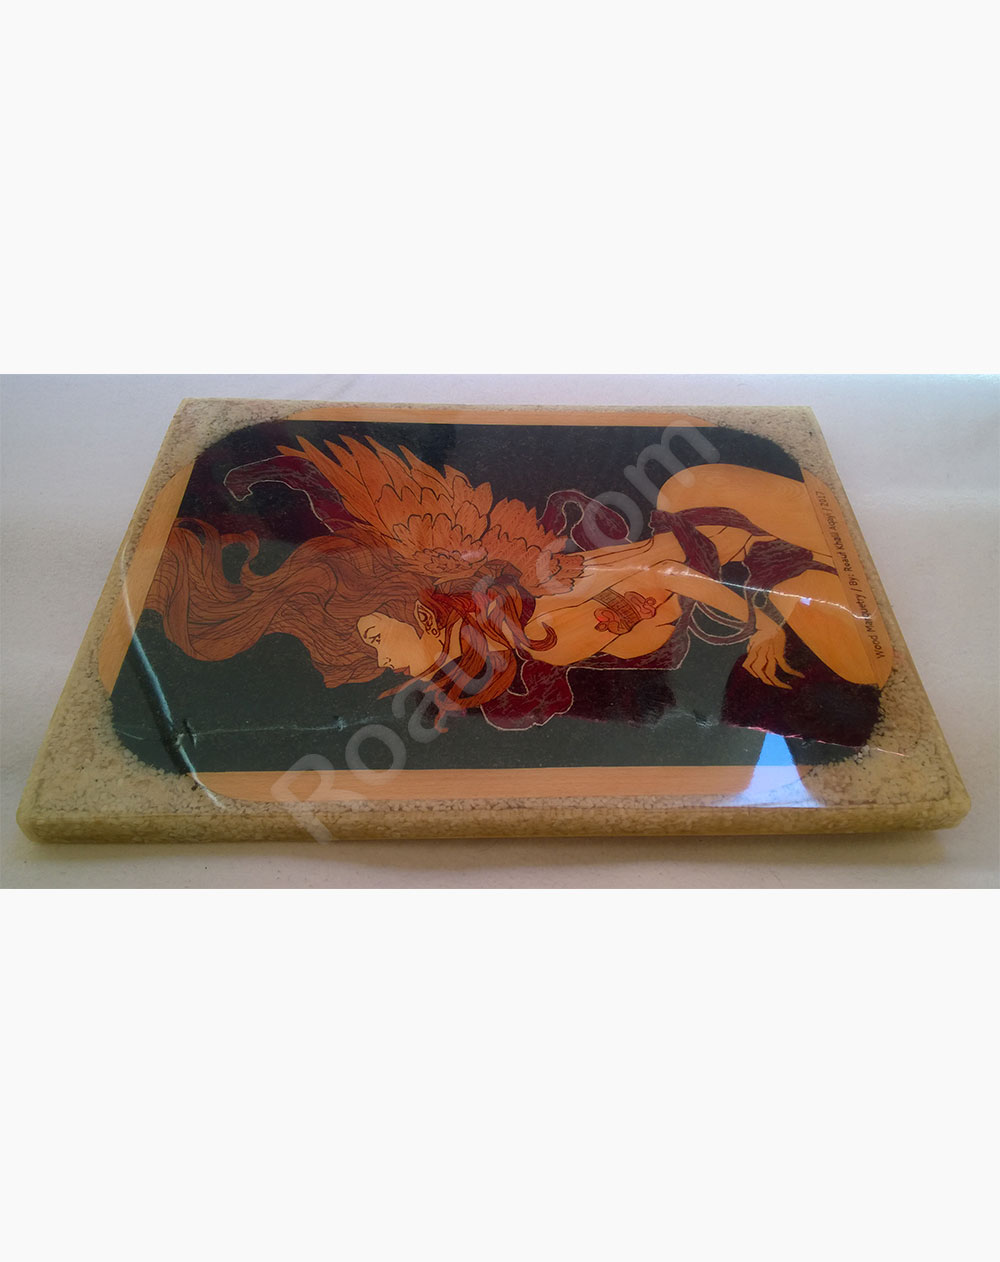 Wood Inlay / Wood Marquetry Panel of a Naked Angel